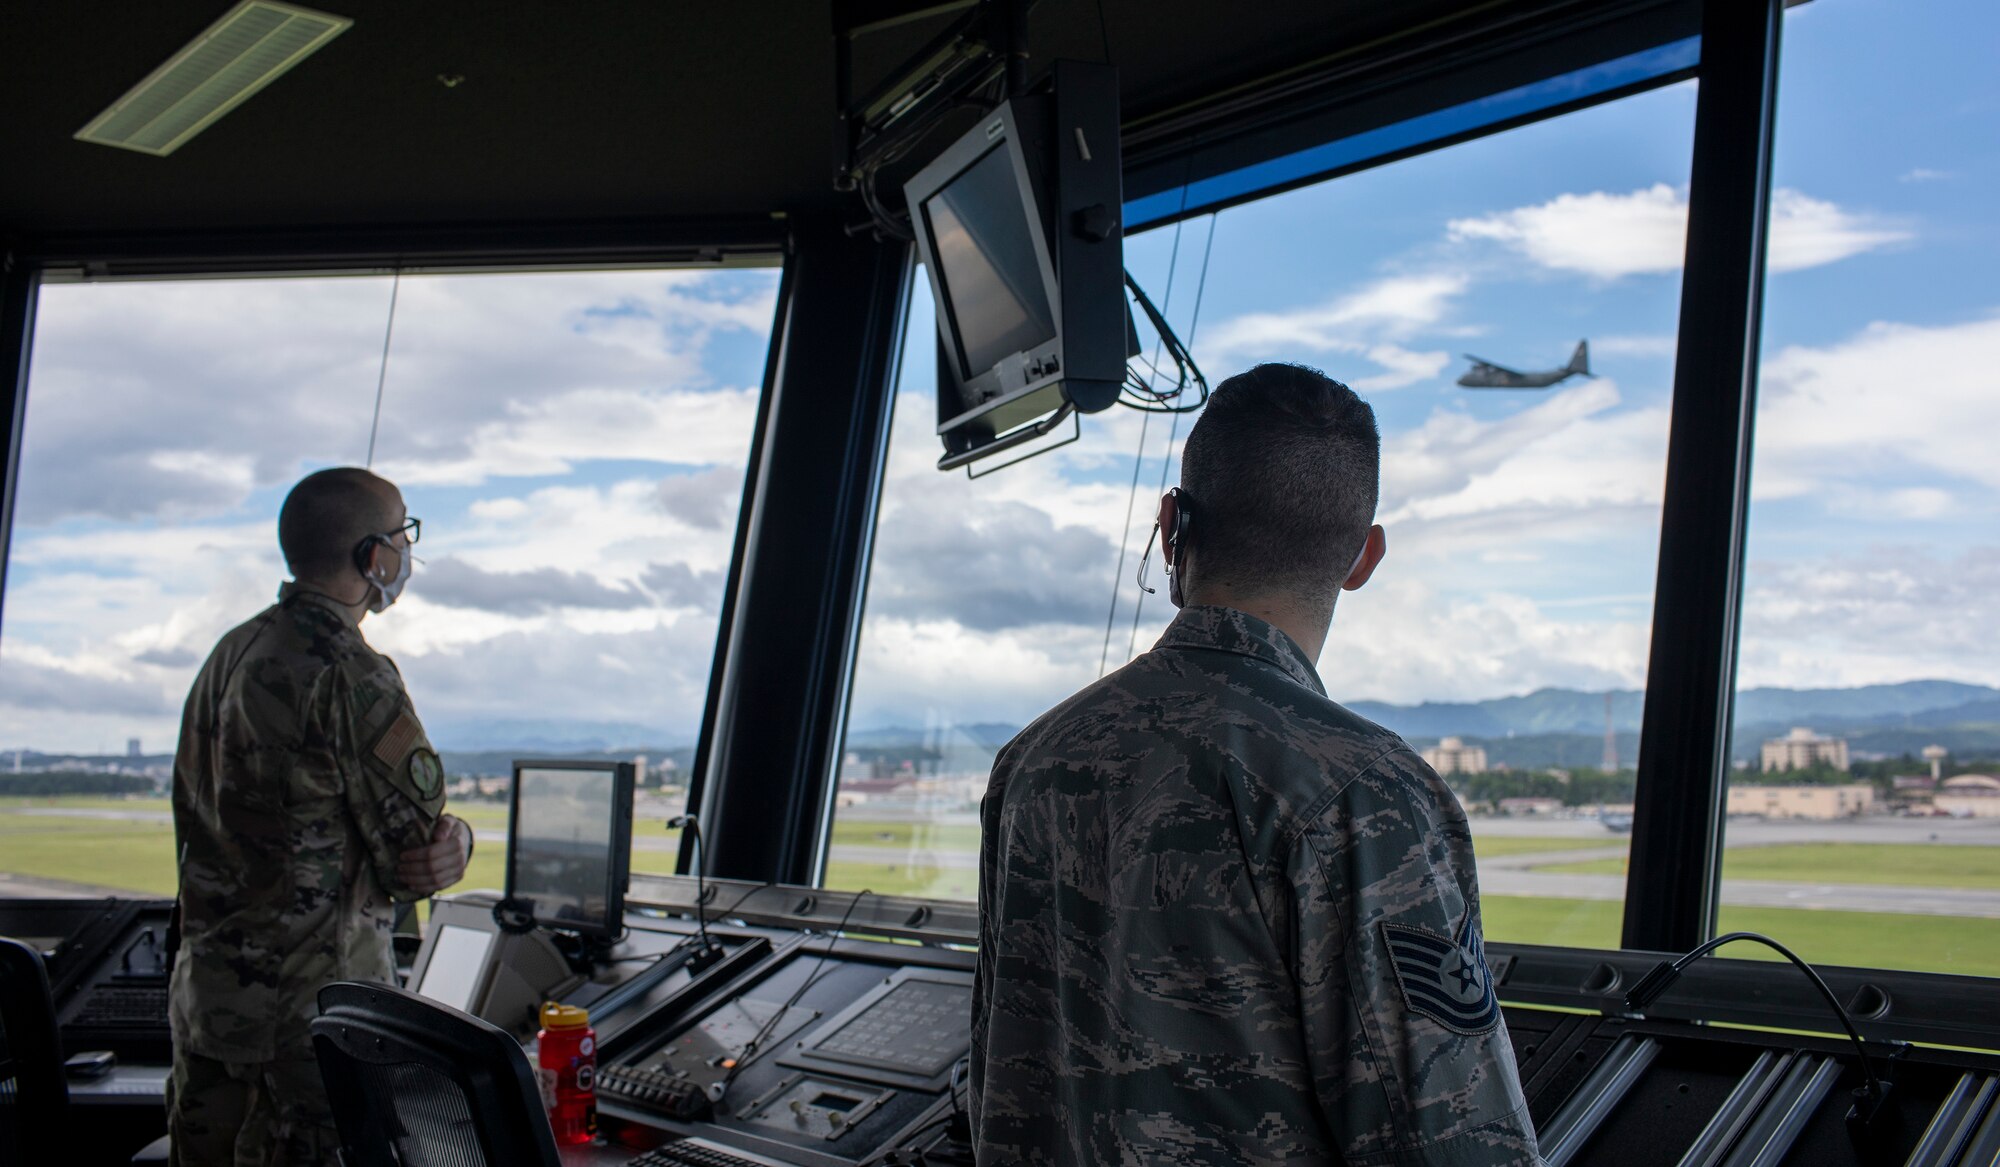 Tech. Sgt. Gregory Nitch and Staff Sgt. Grant Krause, both with the 374th Operations Support Squadron air traffic controllers,